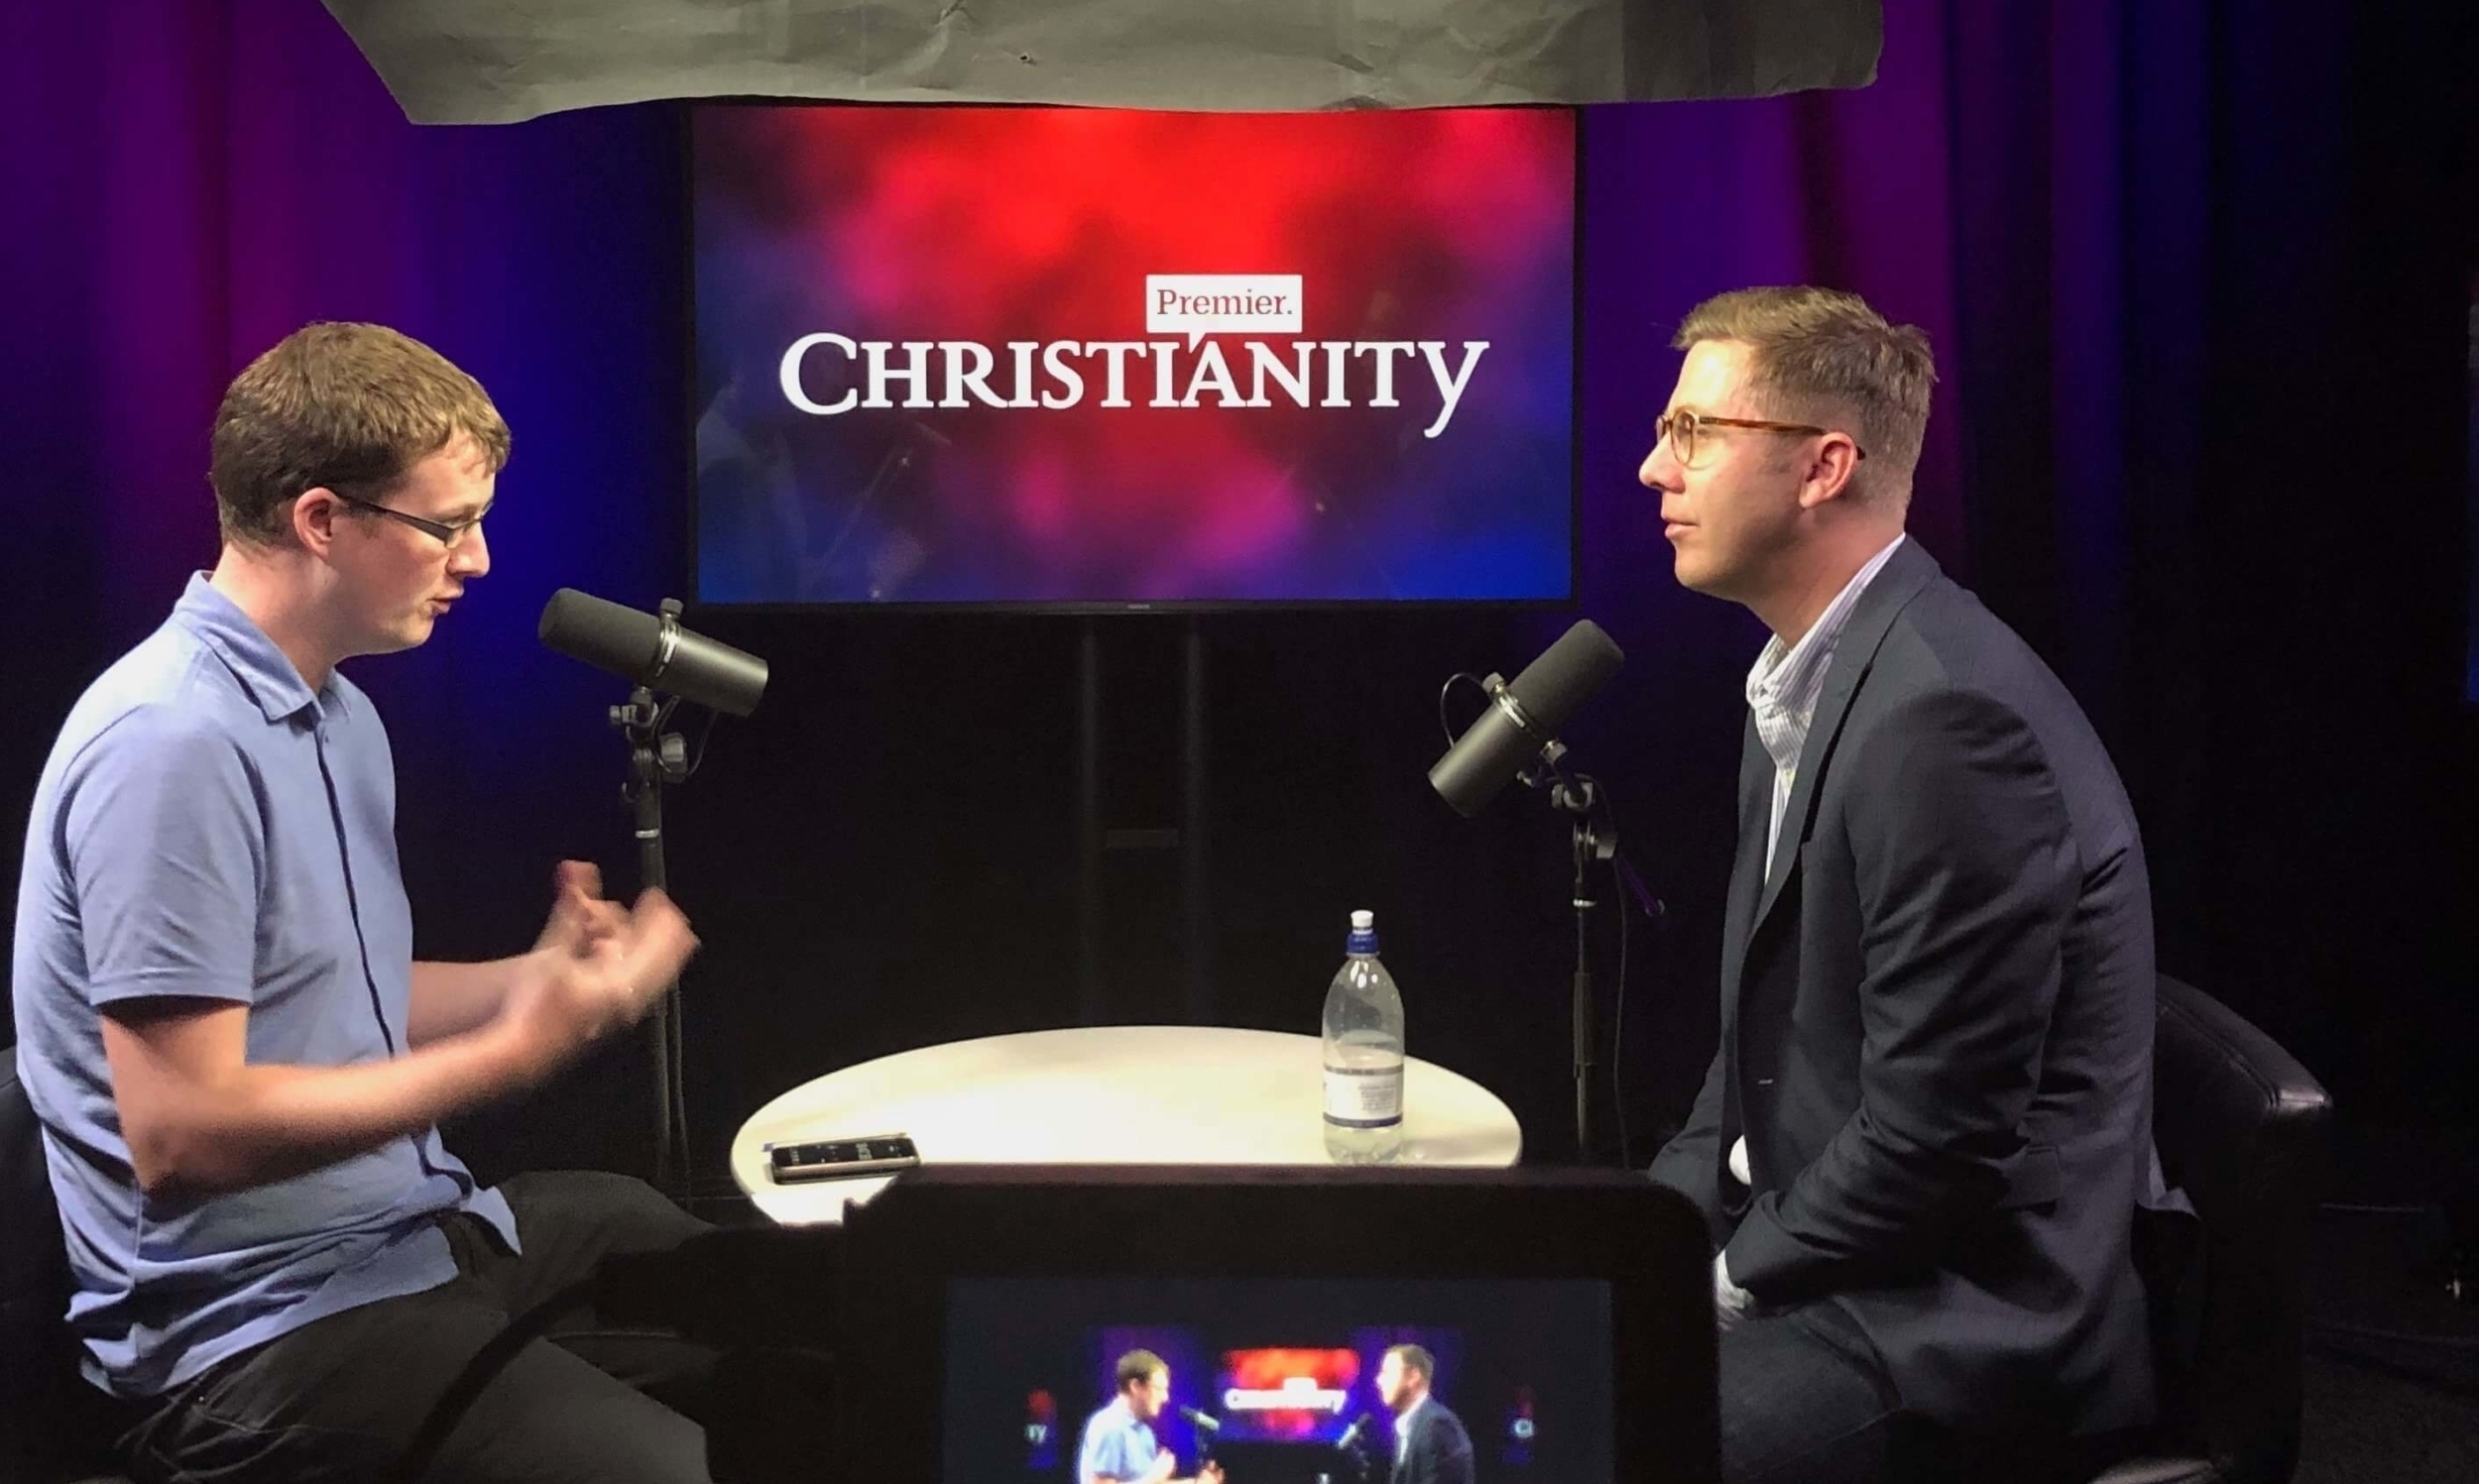 Premier Christianity interview 2 2